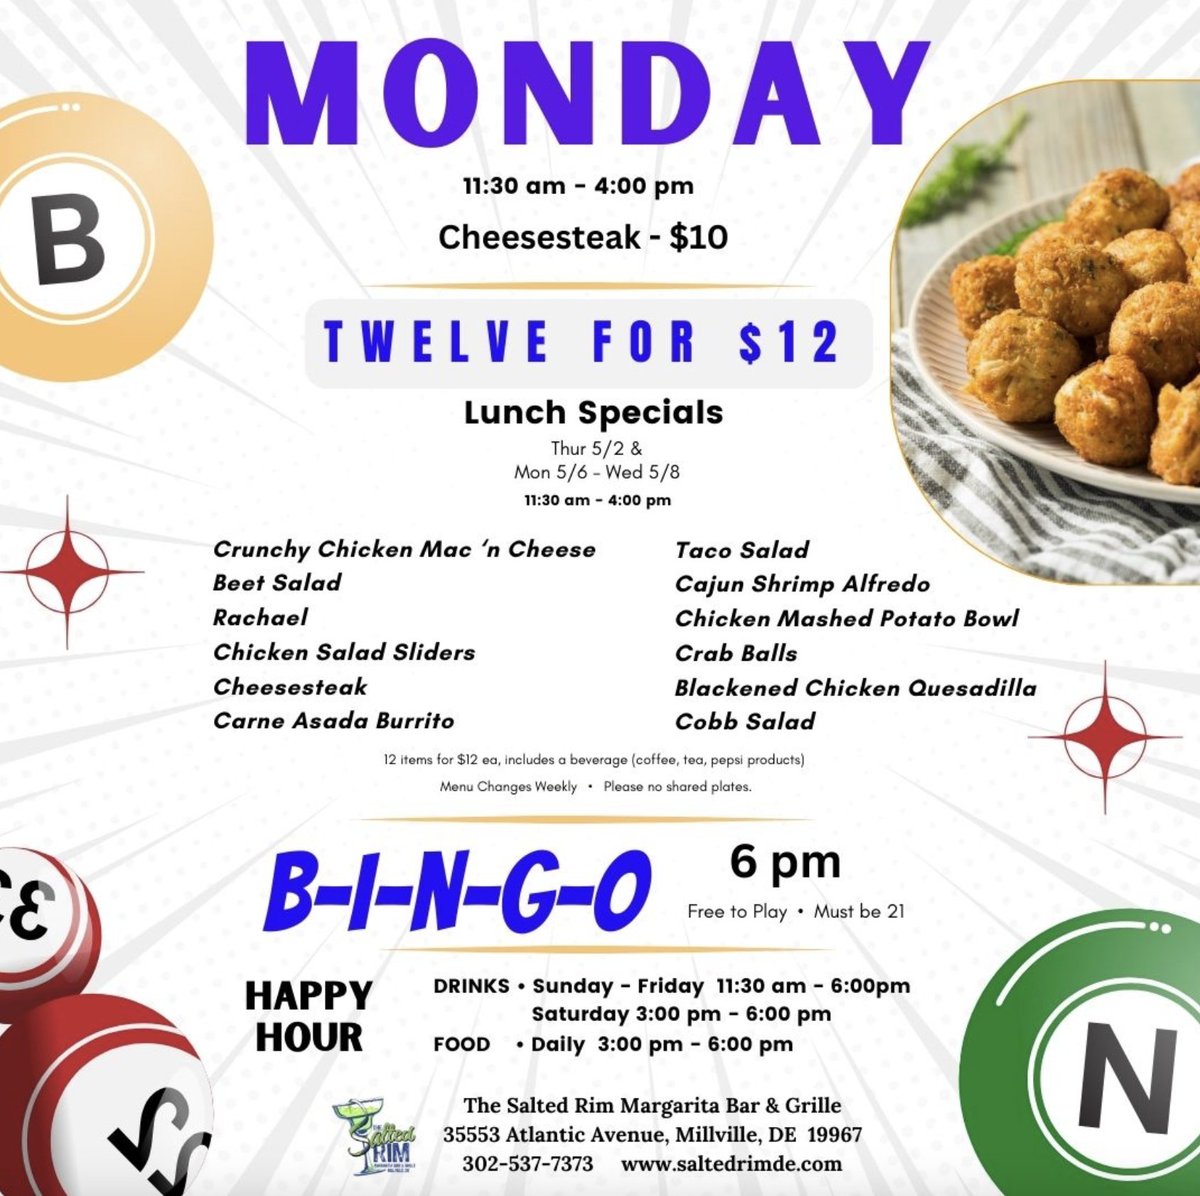 Grab one of our delicious cheesesteaks, then stick around for happy hour, & bingo night! The perfect way to spend your Monday evening. #thesaltedrim #bingonight #mondayspecials #bingo #happyhour #dinnervibes #happymonday